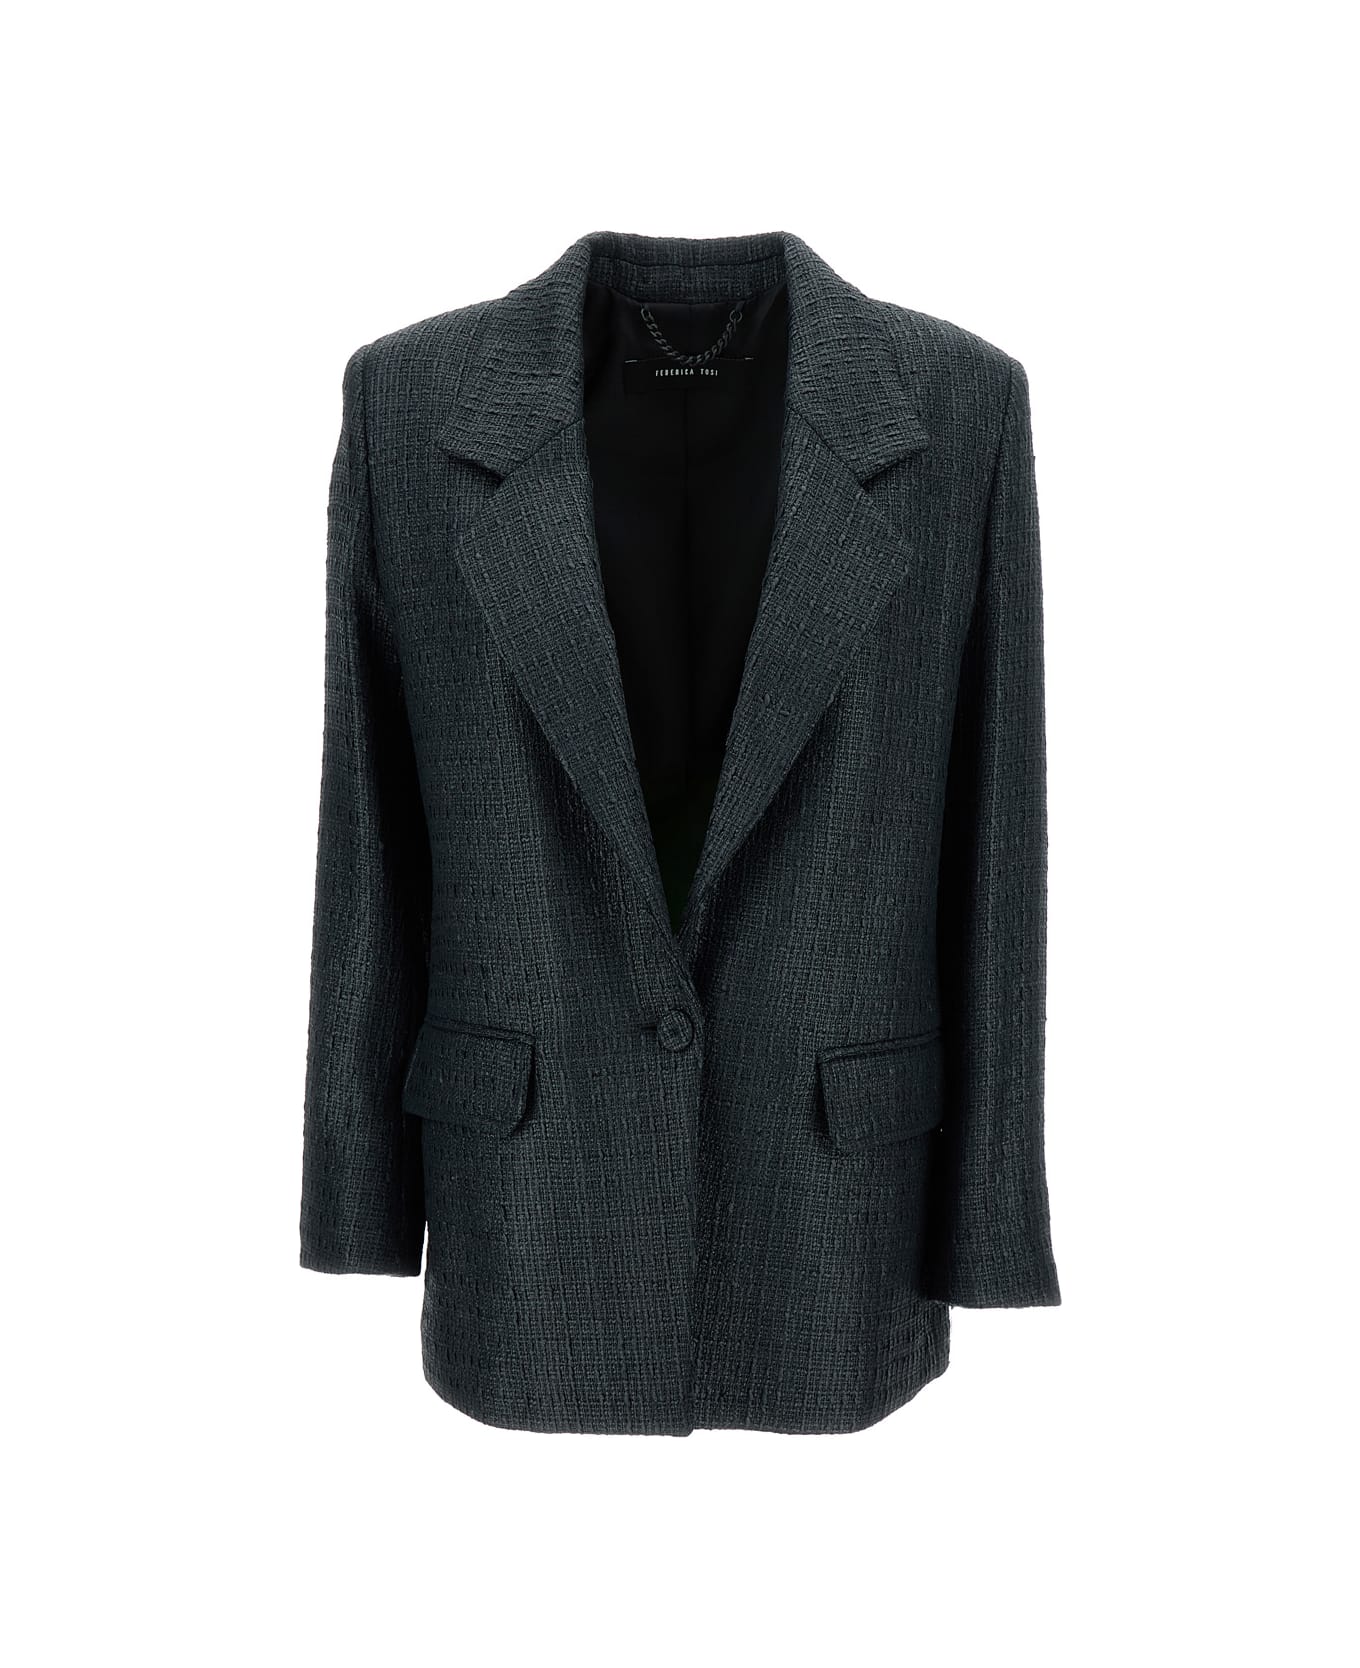 Federica Tosi Black Single-breasted Jacket With A Single Button In Cotton Blend Man - Black